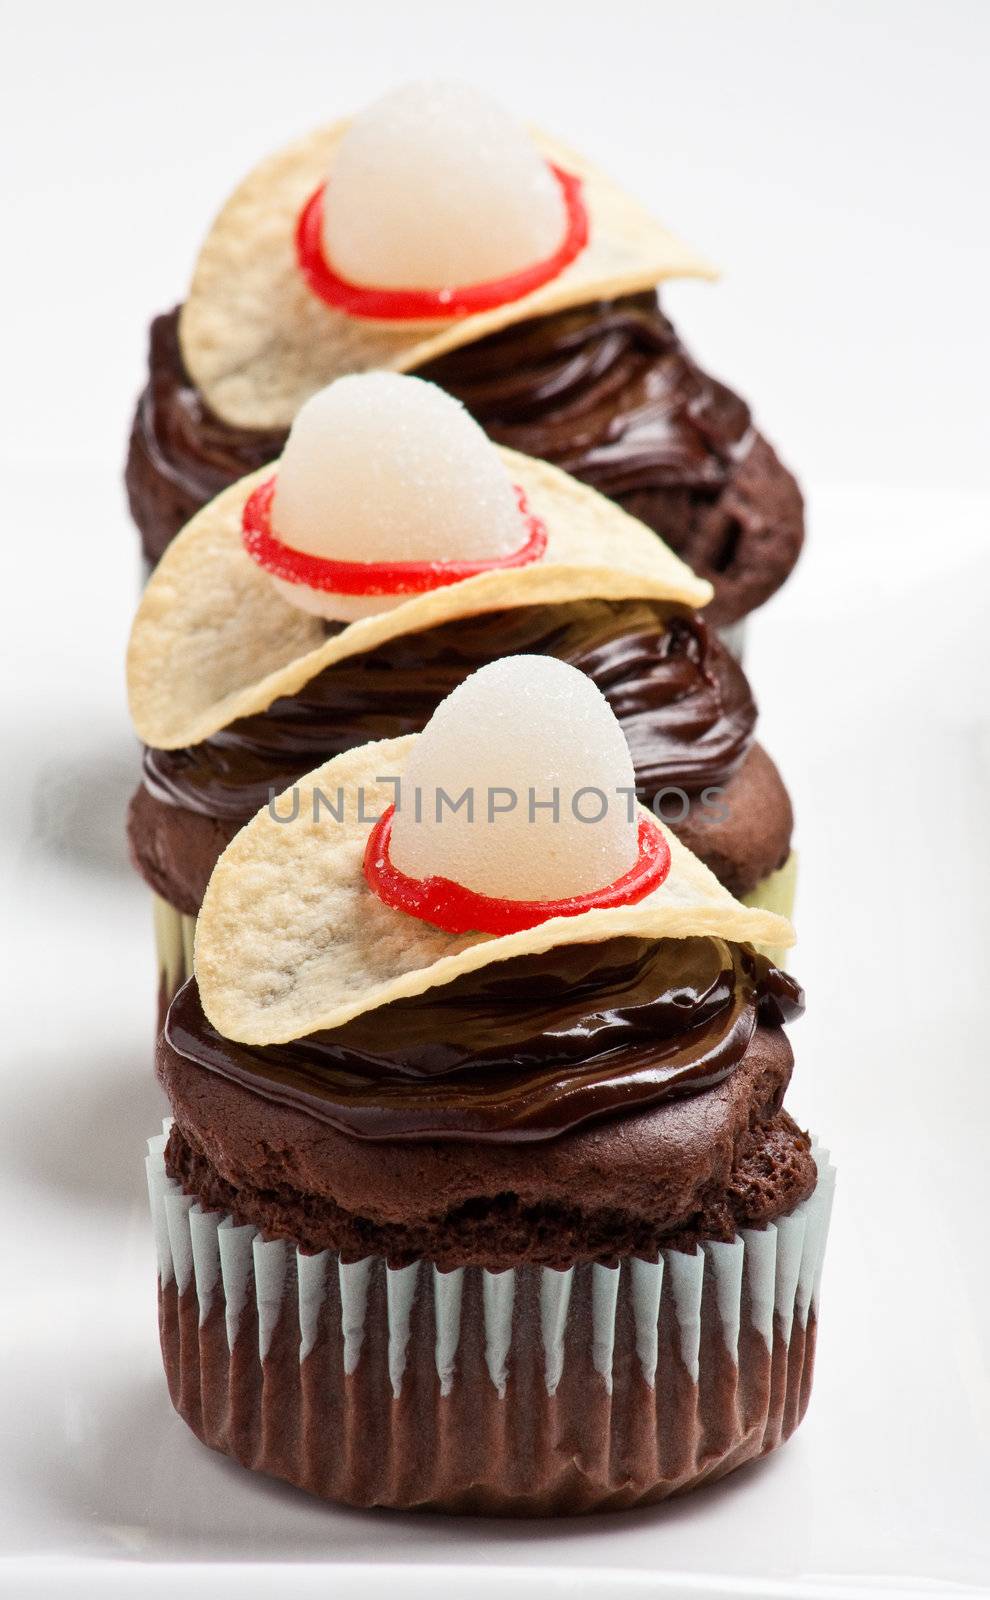 Cowboy cupcakes by Talanis